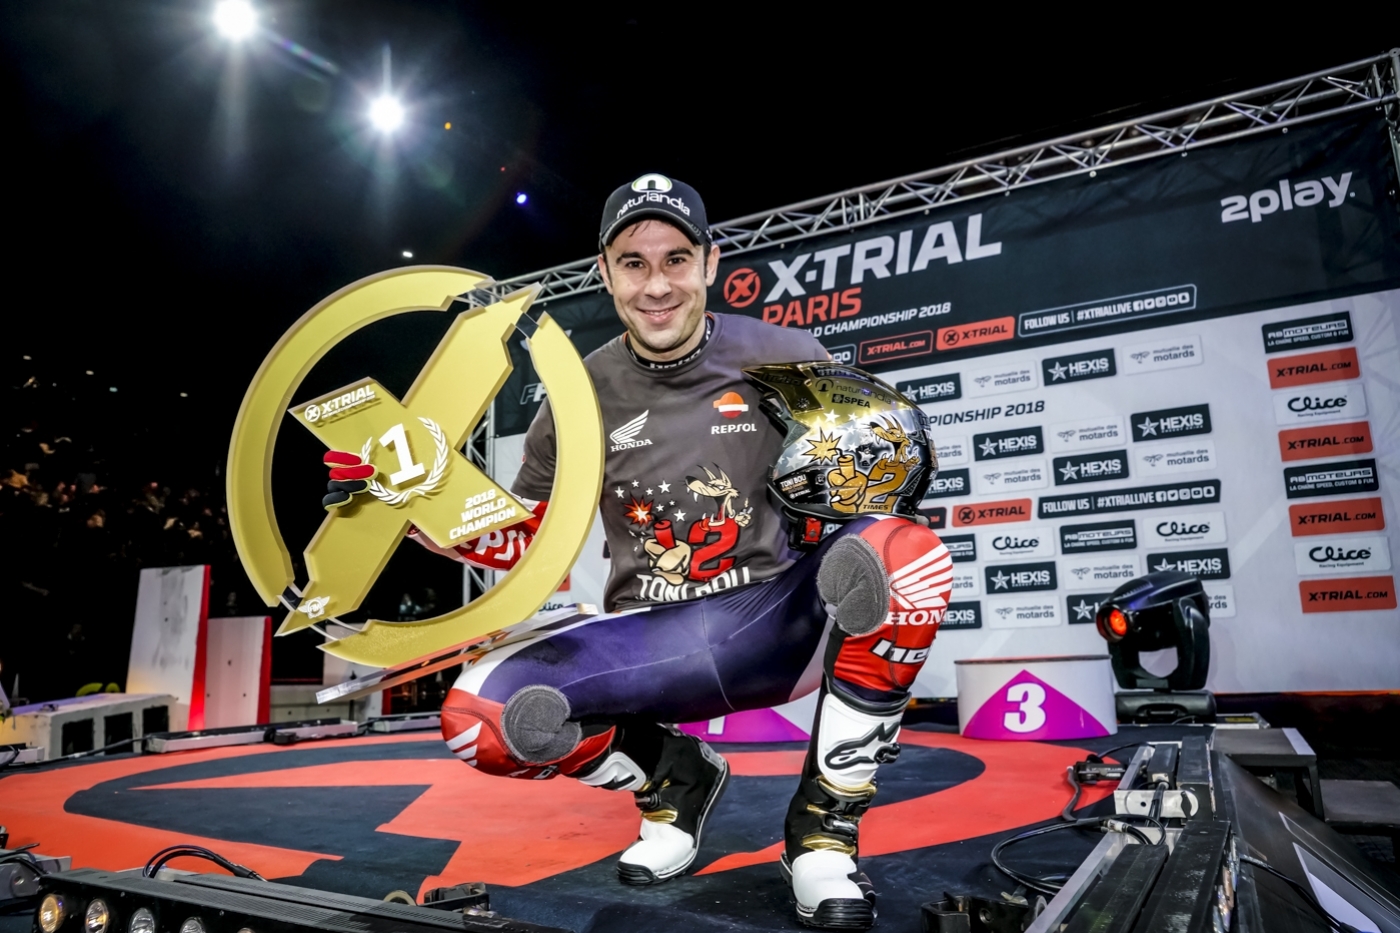 First victory for Busto and title for Bou in Paris